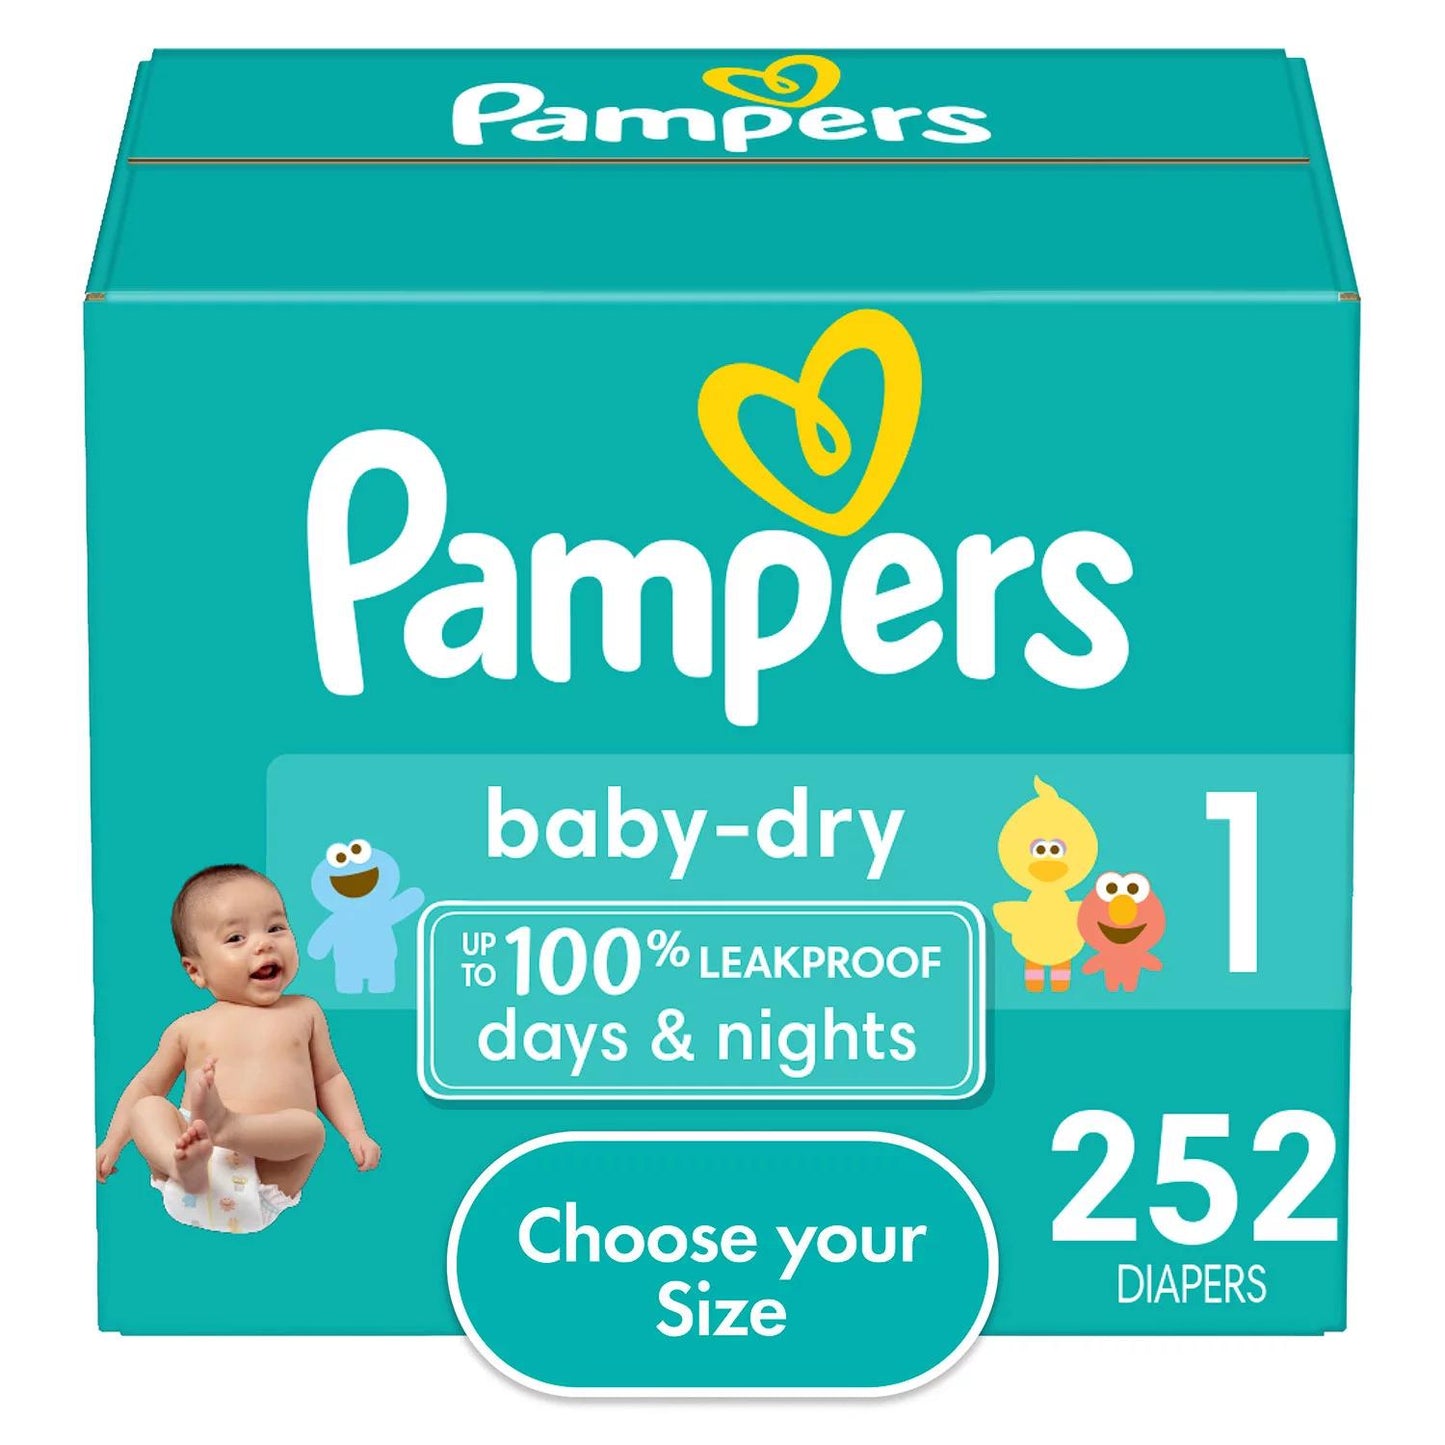 Pampers Baby Dry One Month Supply Diapers (Sizes 1-6)